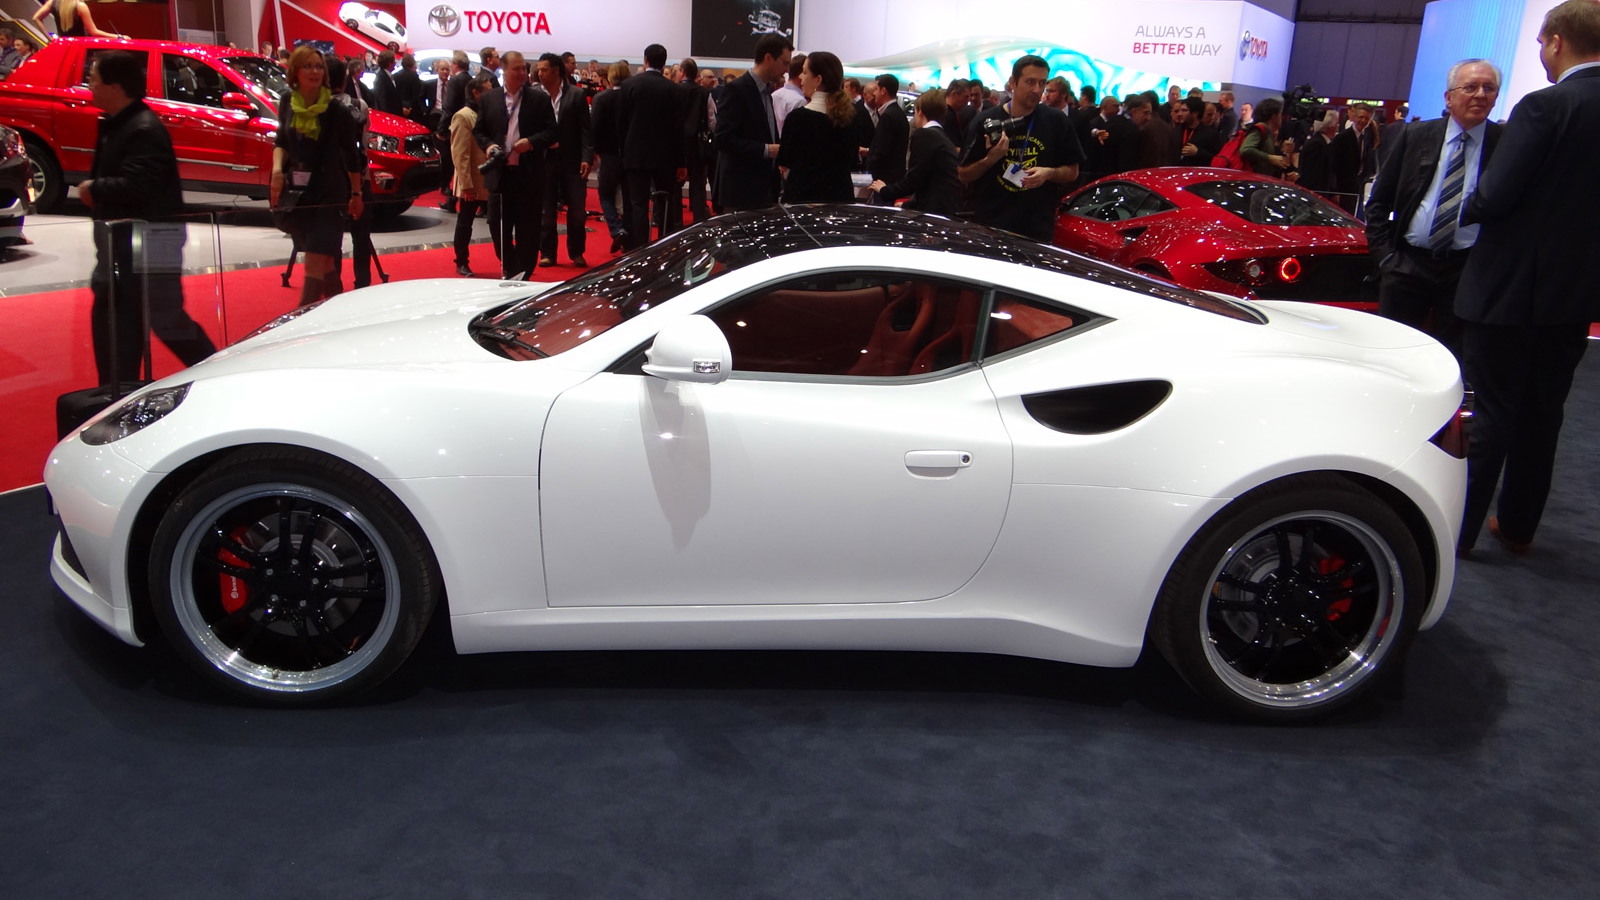 2012 Artega GT Concept featuring panoramic glass roof